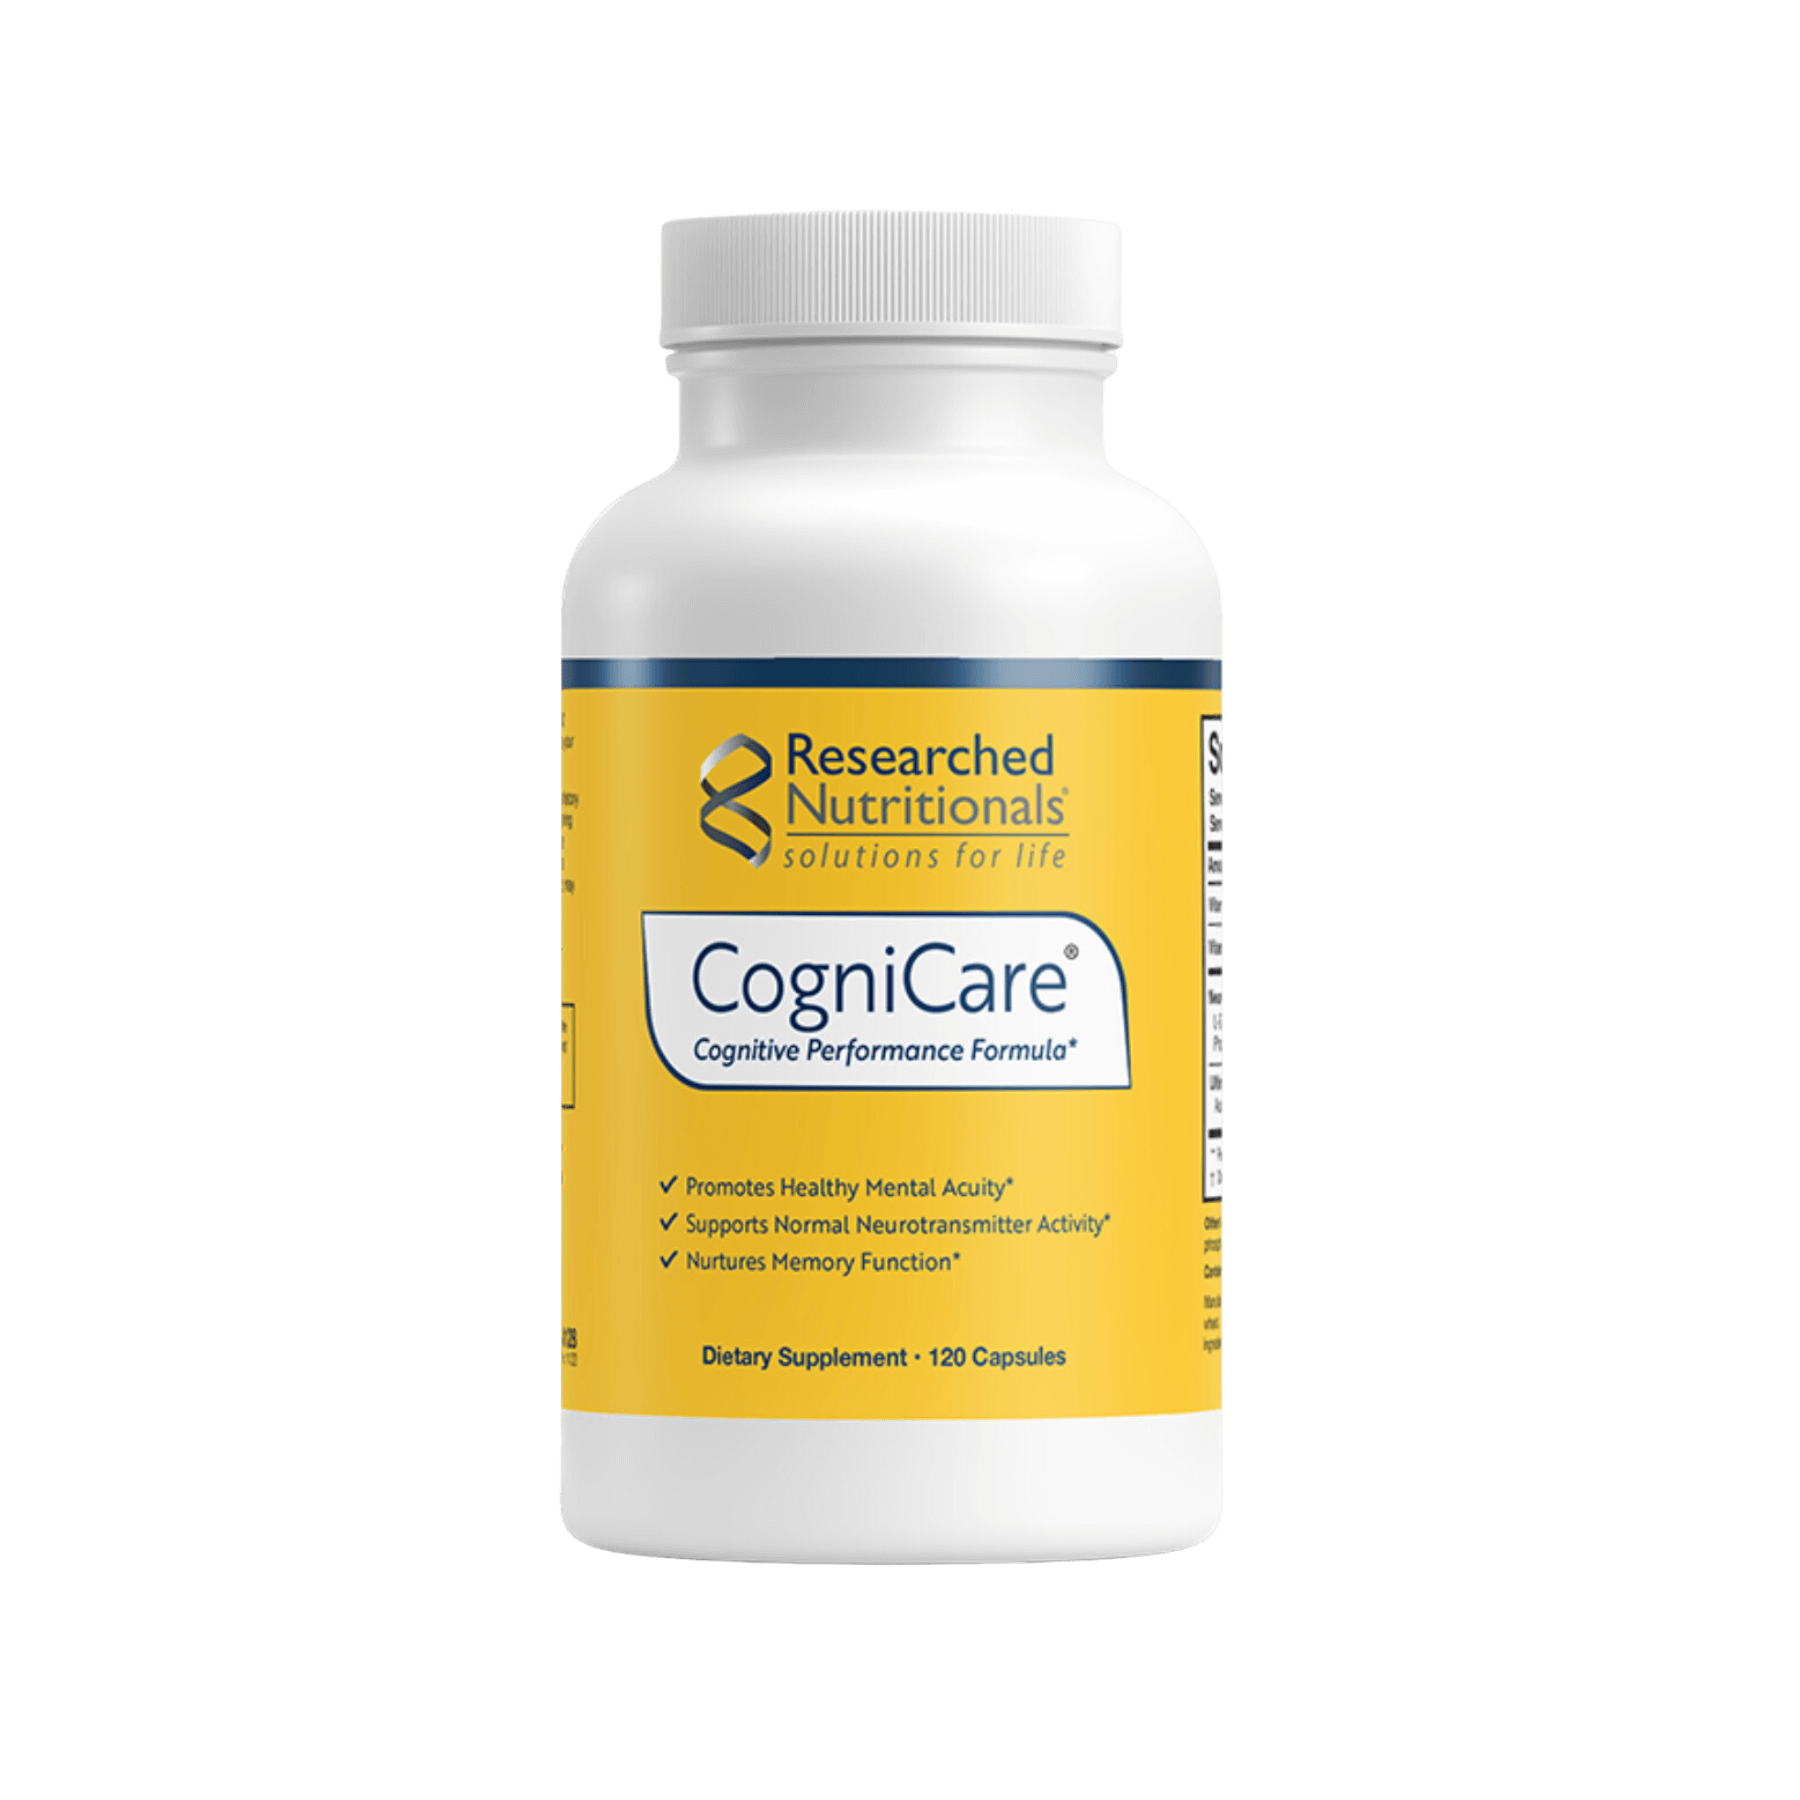 Researched Nutritionals Cognicare Capsules